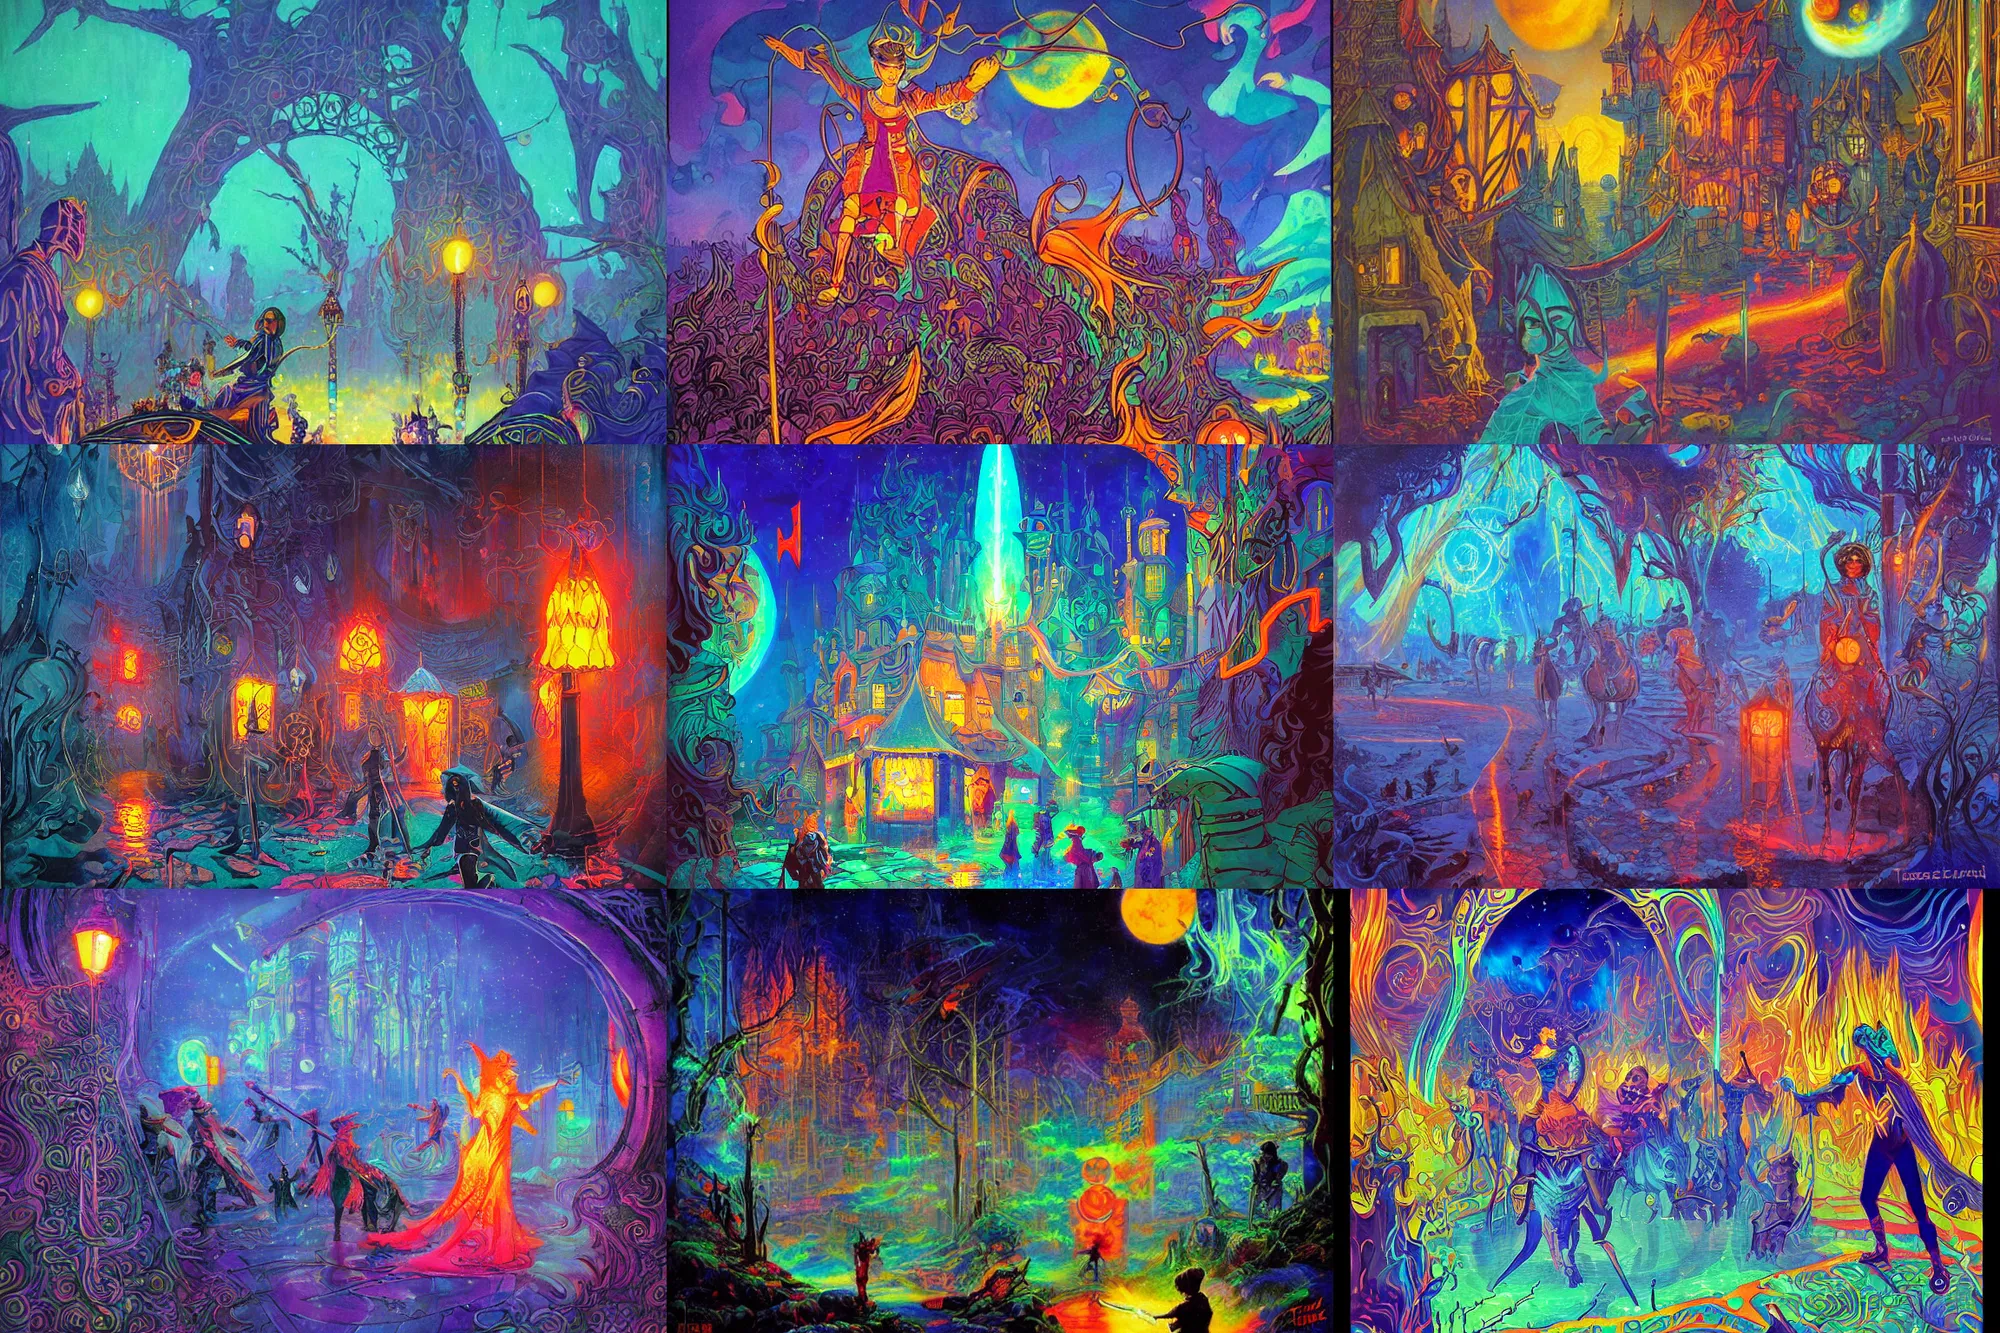 Prompt: The gouache wanderer encounters bandits in a nightmare flux zone, a fantasy sci-fi dreamworld painting in neon geometric inks, art nouveau by Terese Edvard Guay Kinkade